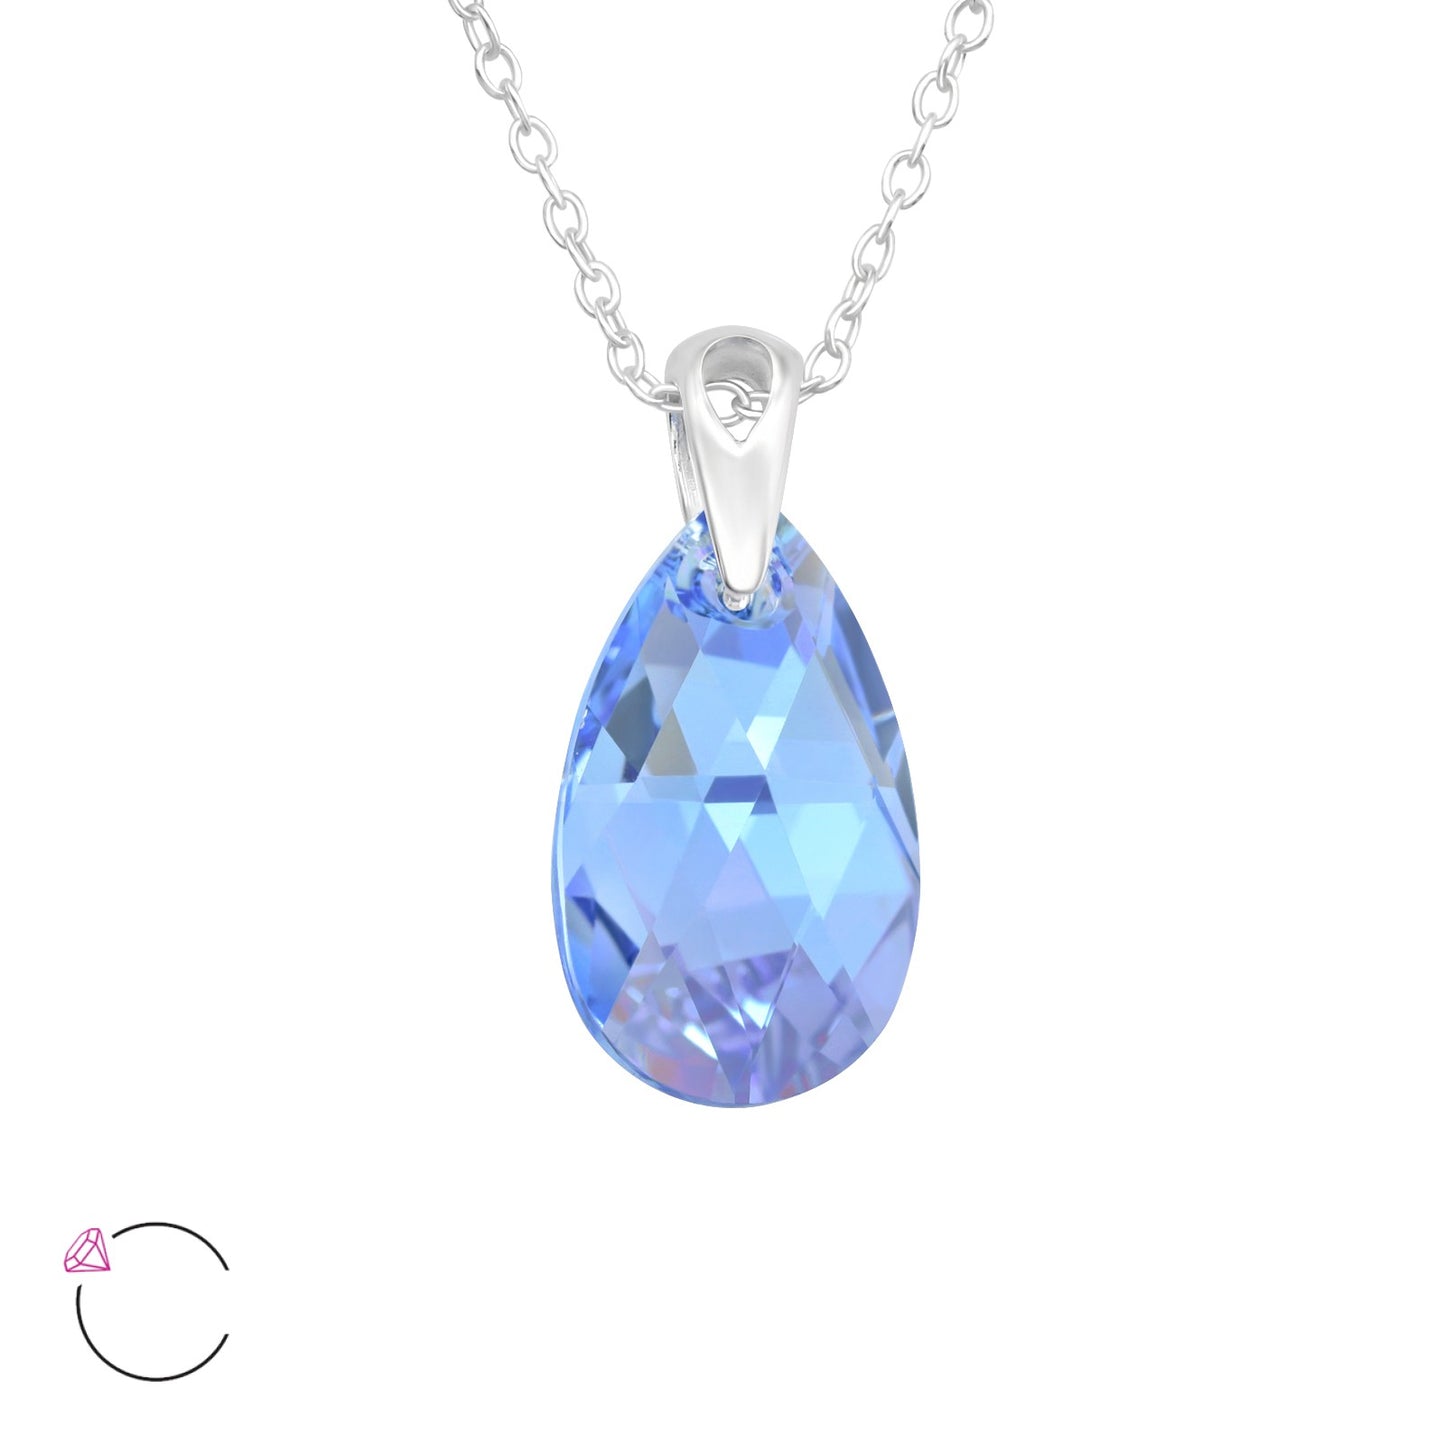 Blue European Crystal Pendant - Sterling Silver Necklace